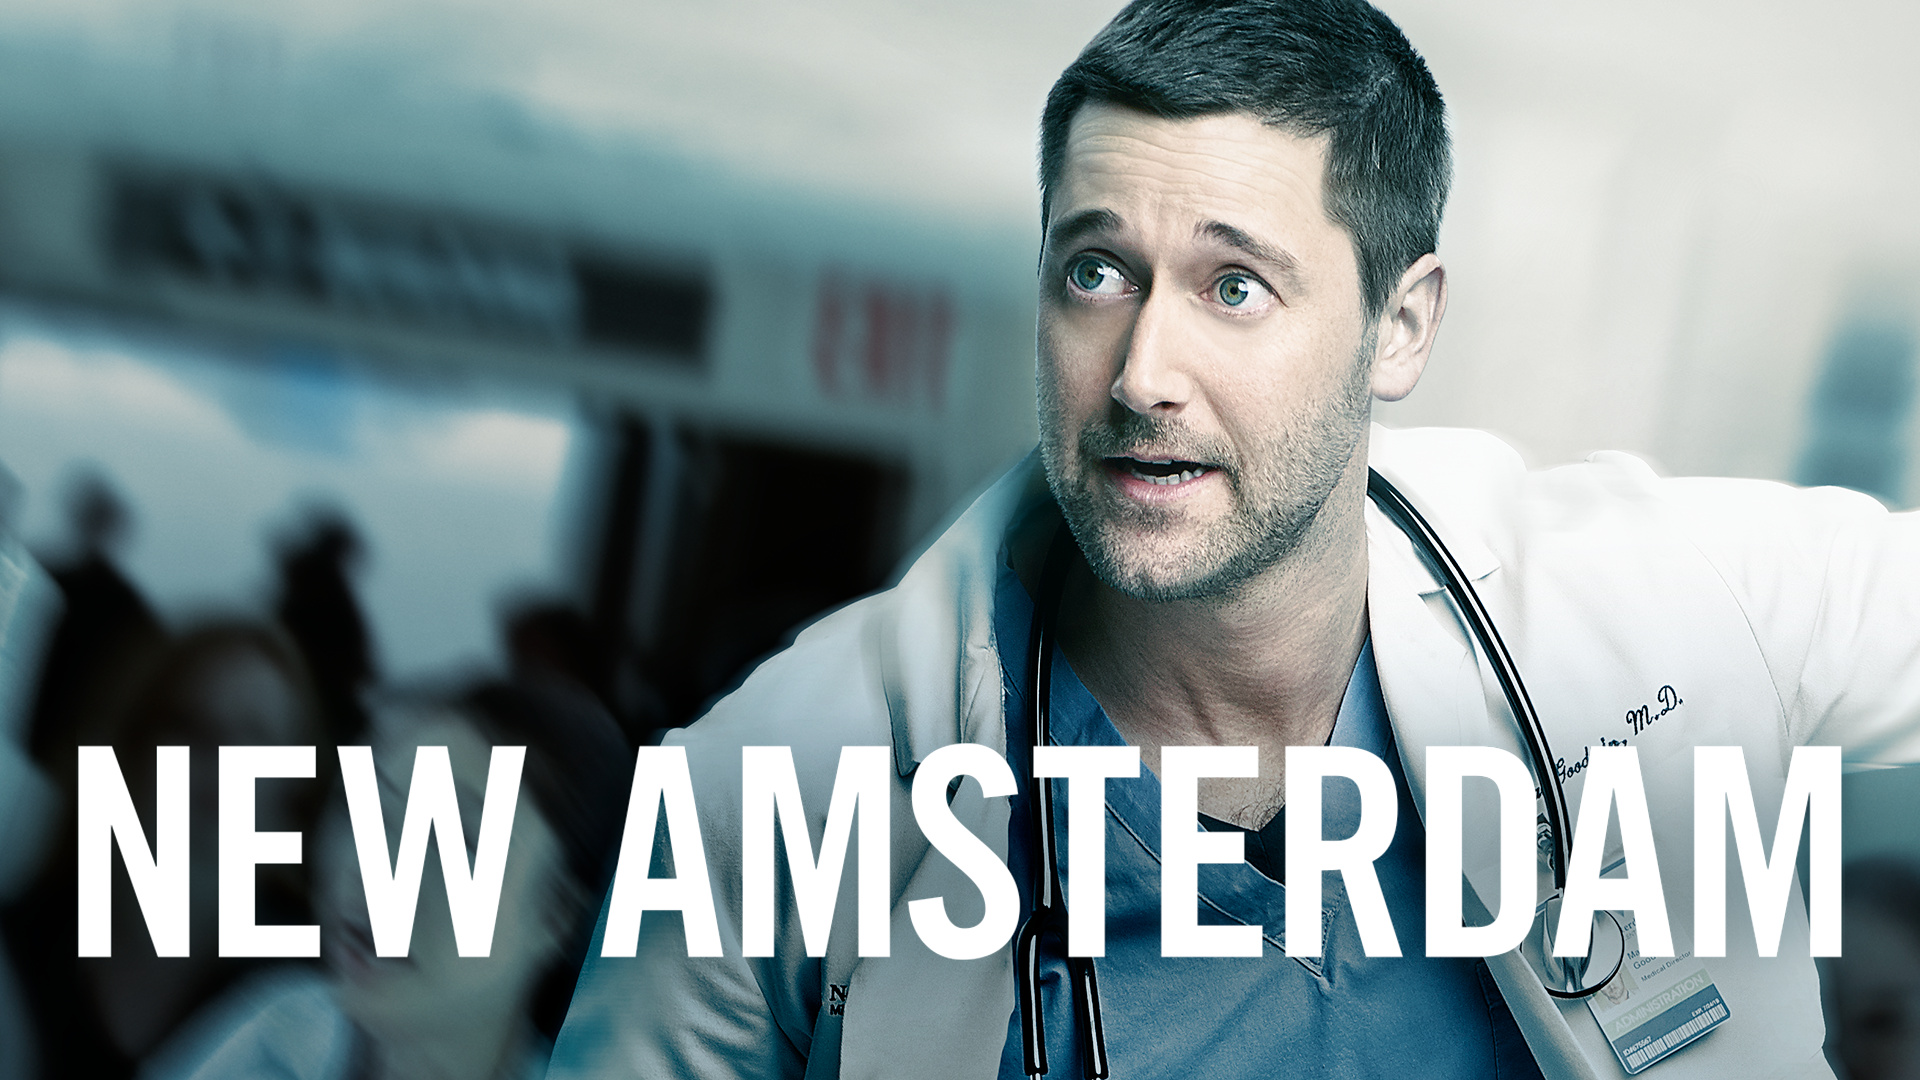 New Amsterdam Wallpapers - Top Free New Amsterdam Backgrounds 1920x1080